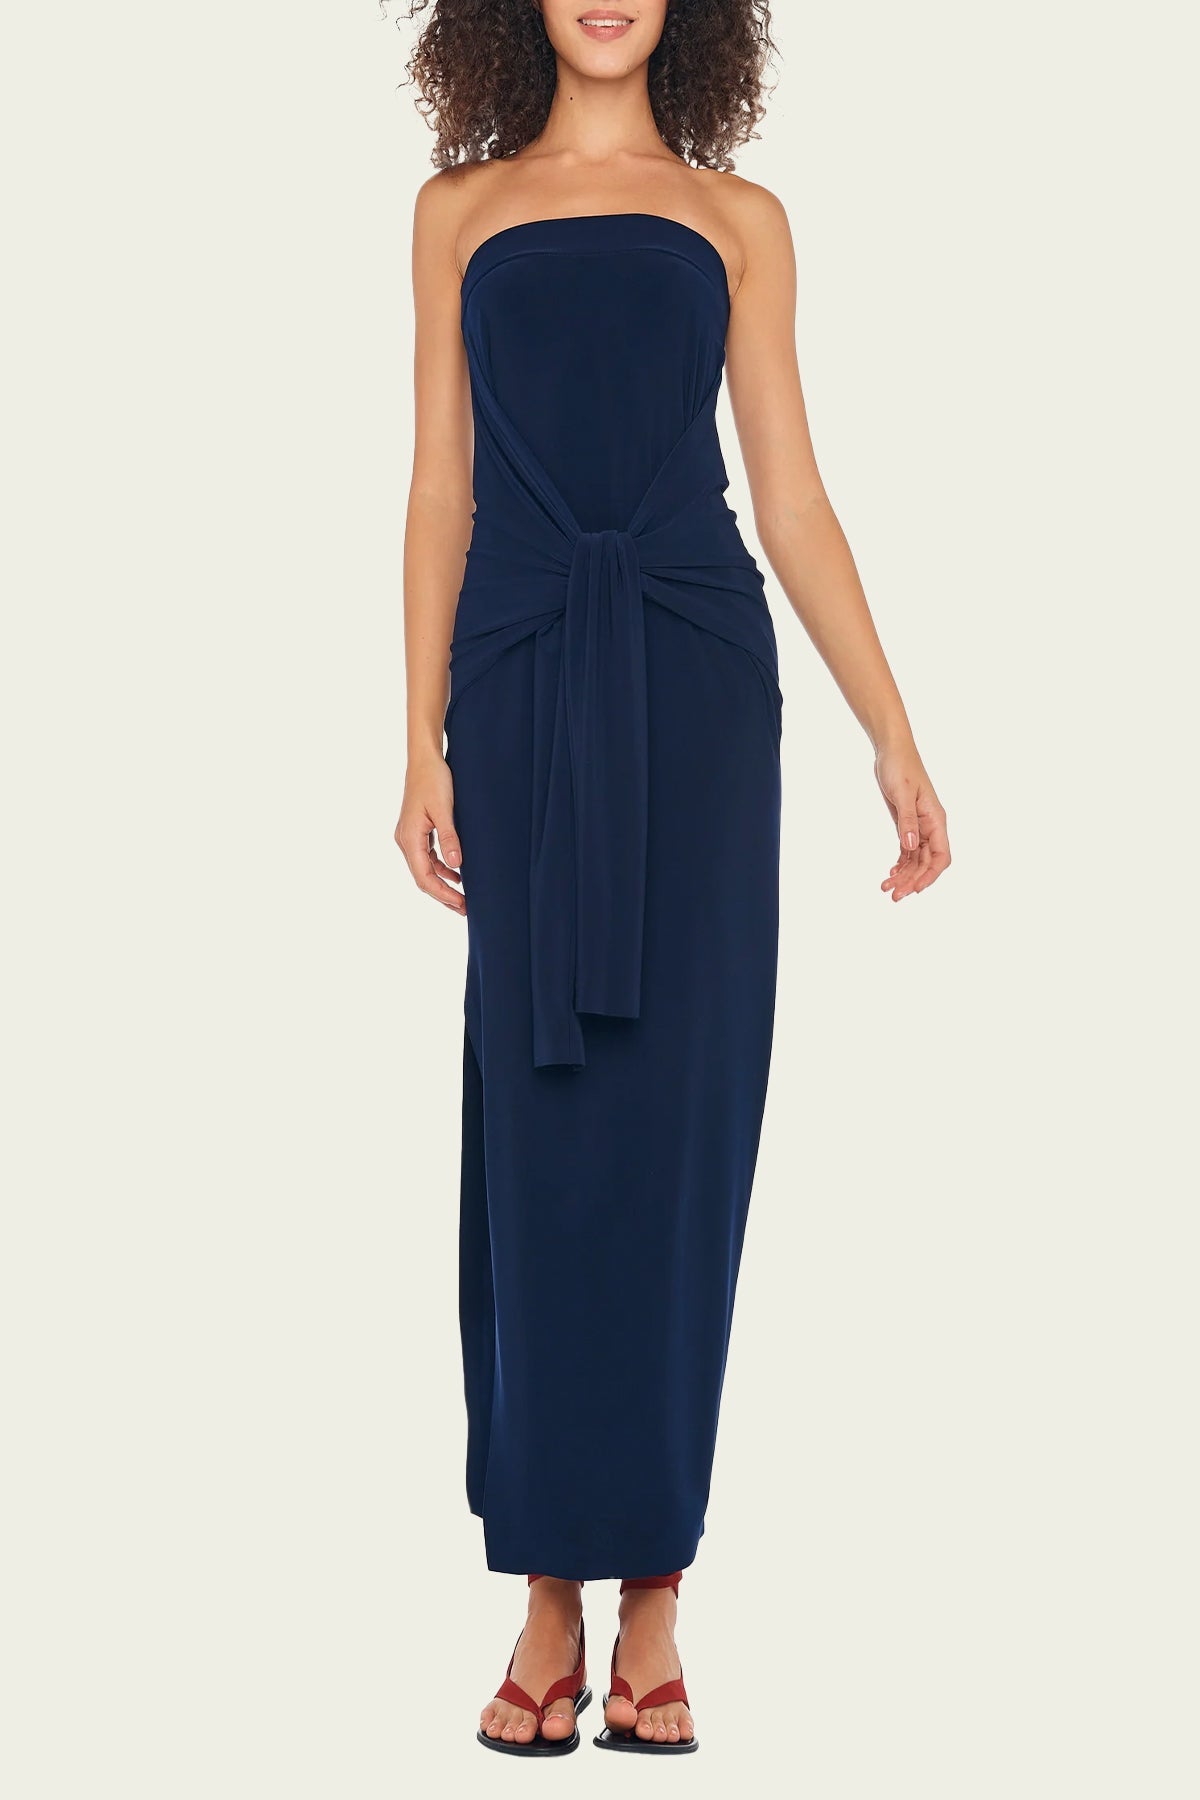 Strapless All-in-One Side Slit Gown in True Navy - shop-olivia.com